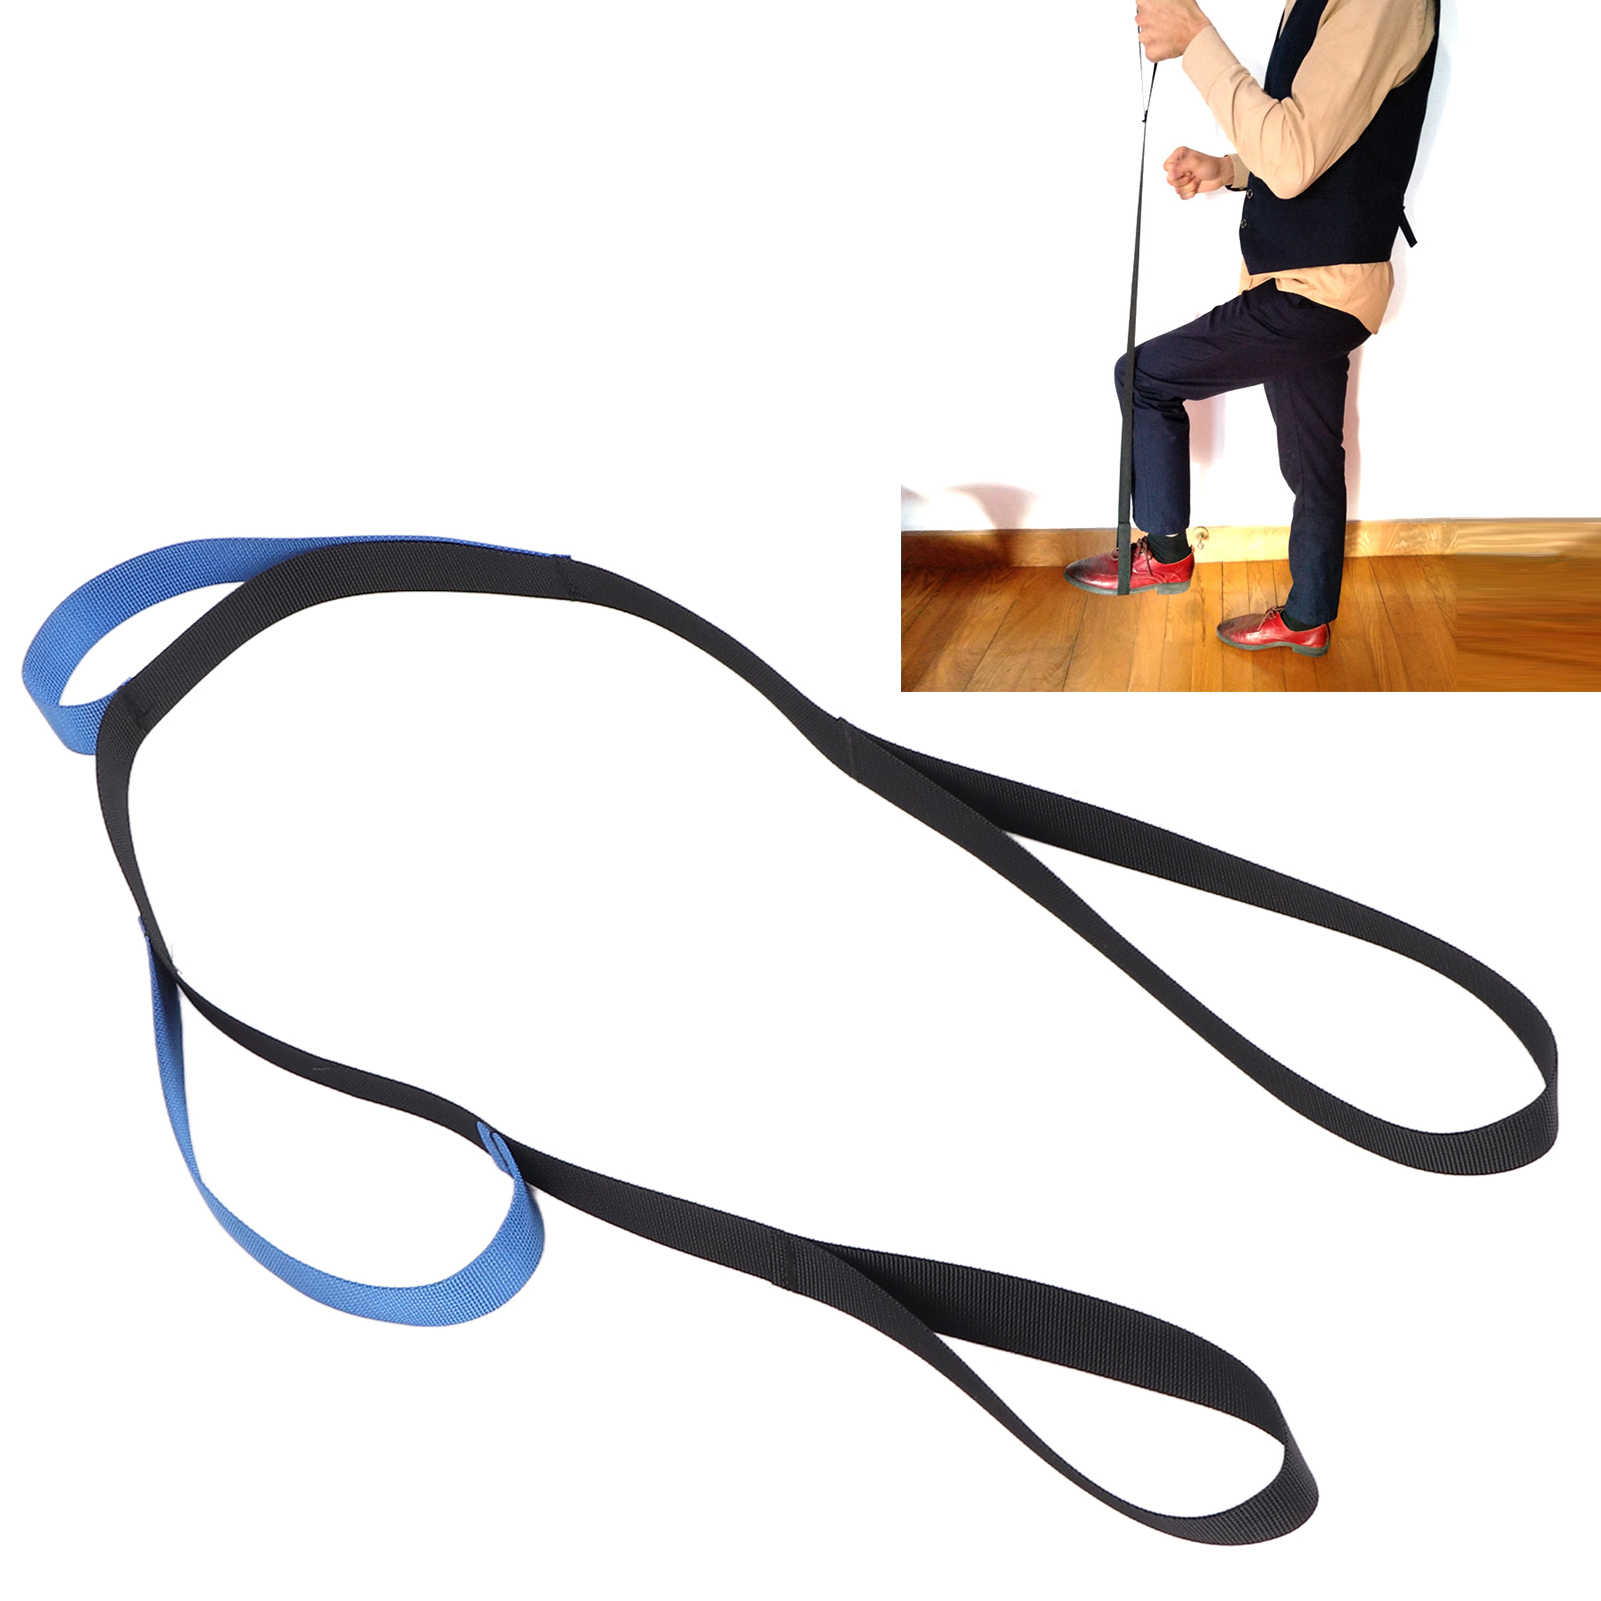 Leg Lifter Strap Professional Skin Friendly Walking Practice Leg Lifter  Wear Resistant Ergonomic Portable Flexible for Recovery for Home Hospital